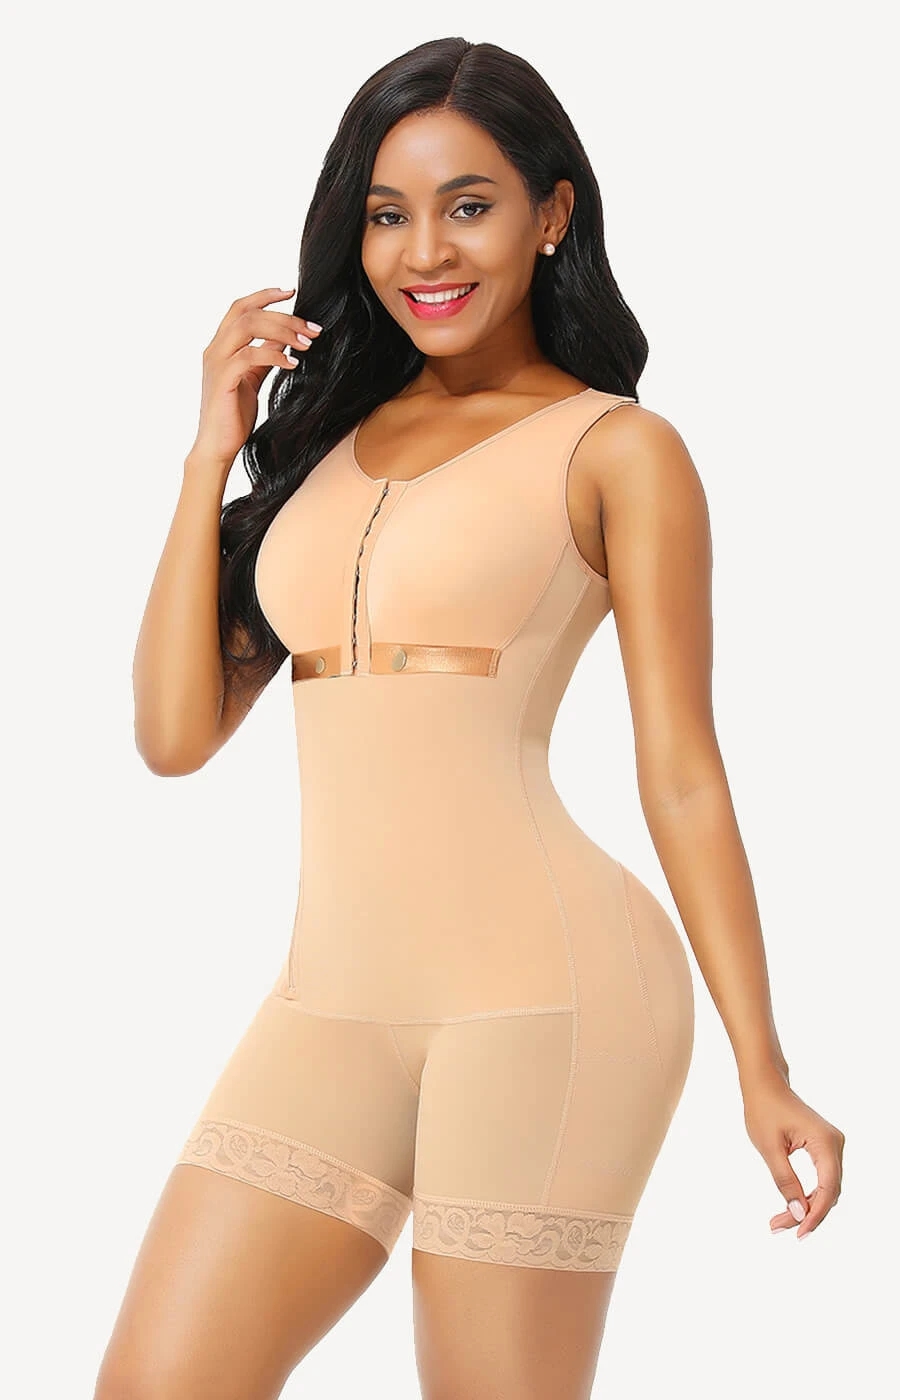 How to Find Right Shapewear For Yourself